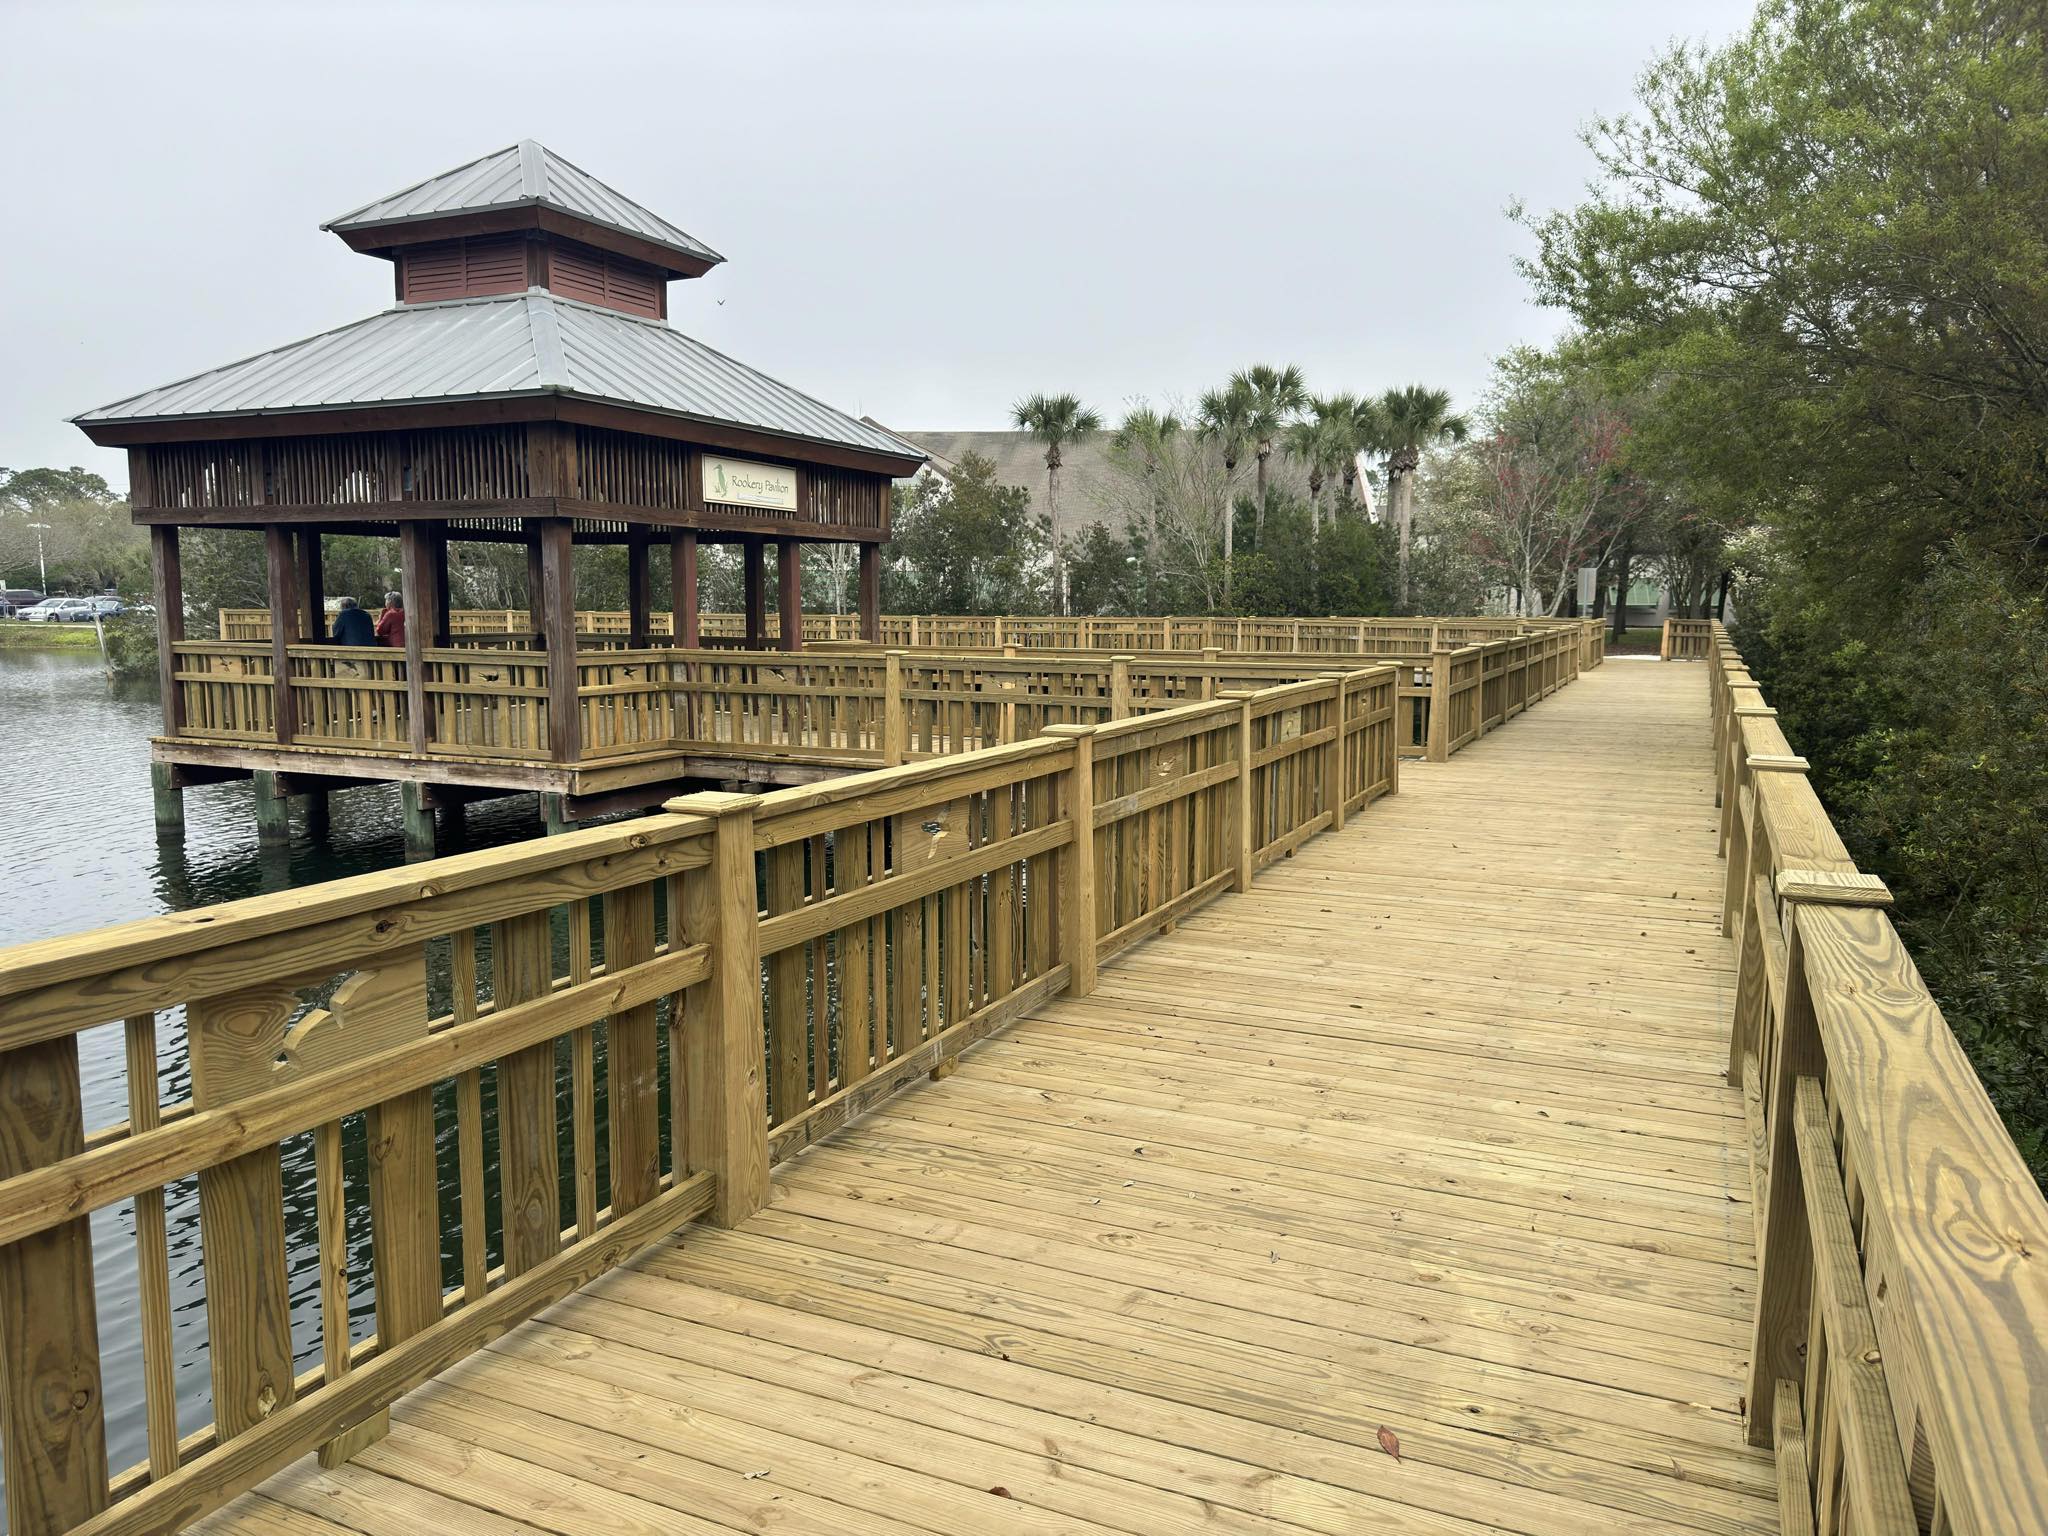 Wooden walkway on a lake surrounded by trees, with a covered pavilion to the left.